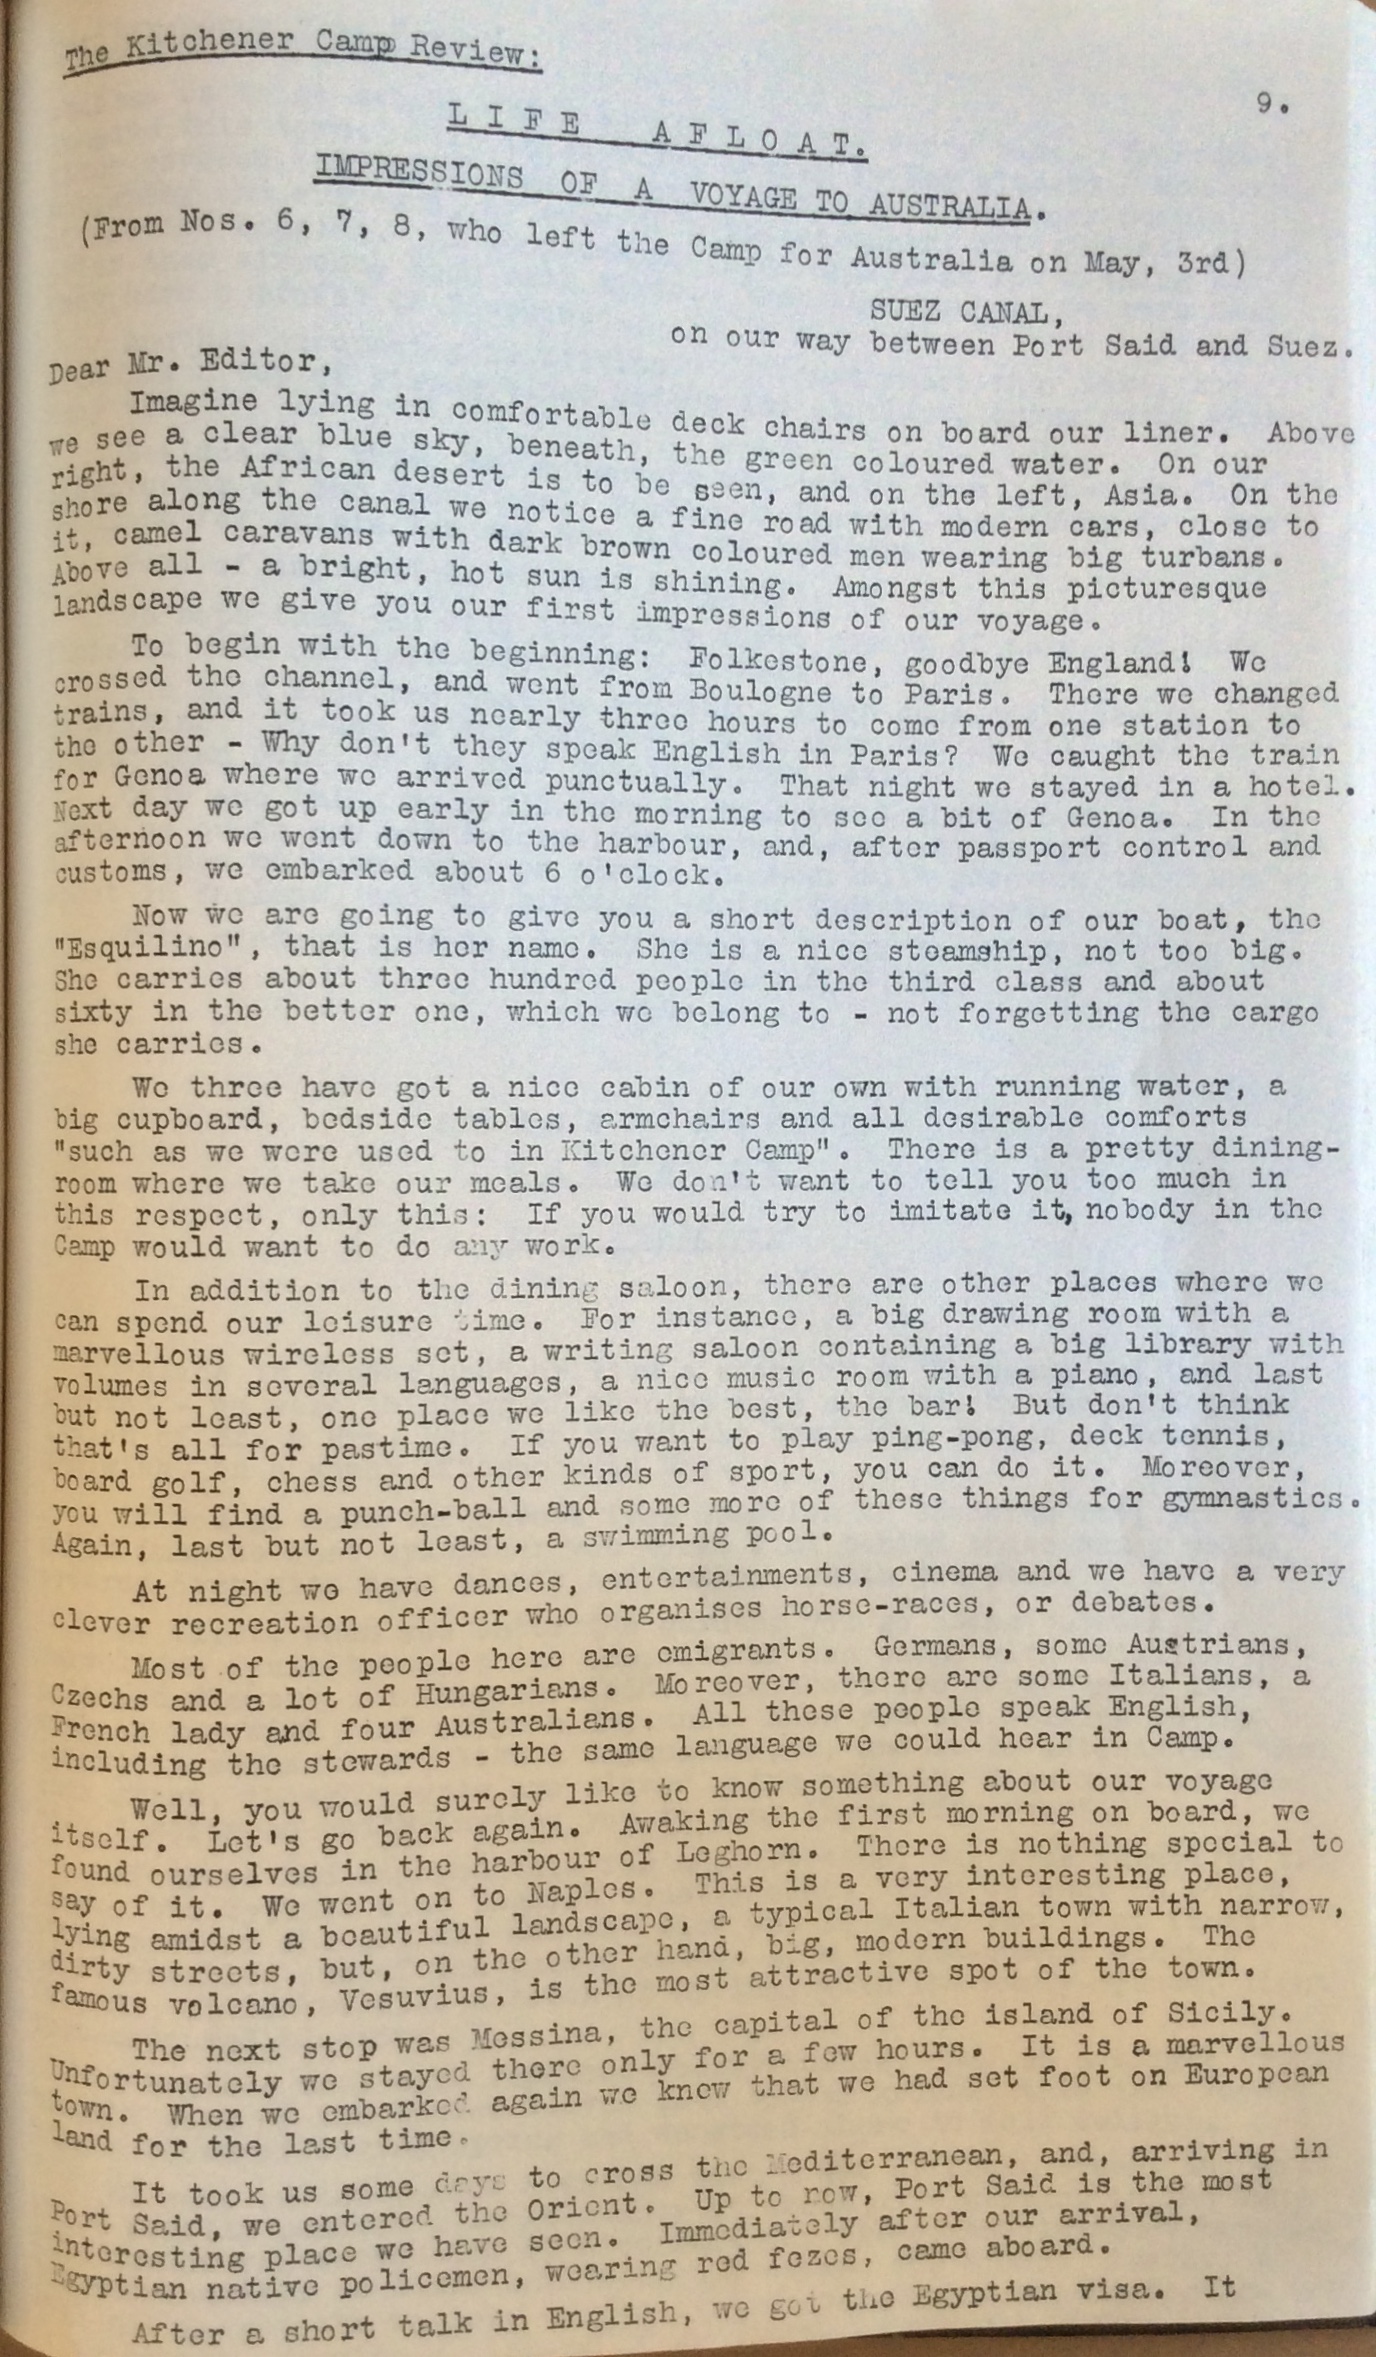 The Kitchener Camp Review, July 1939, No. 5, page 9